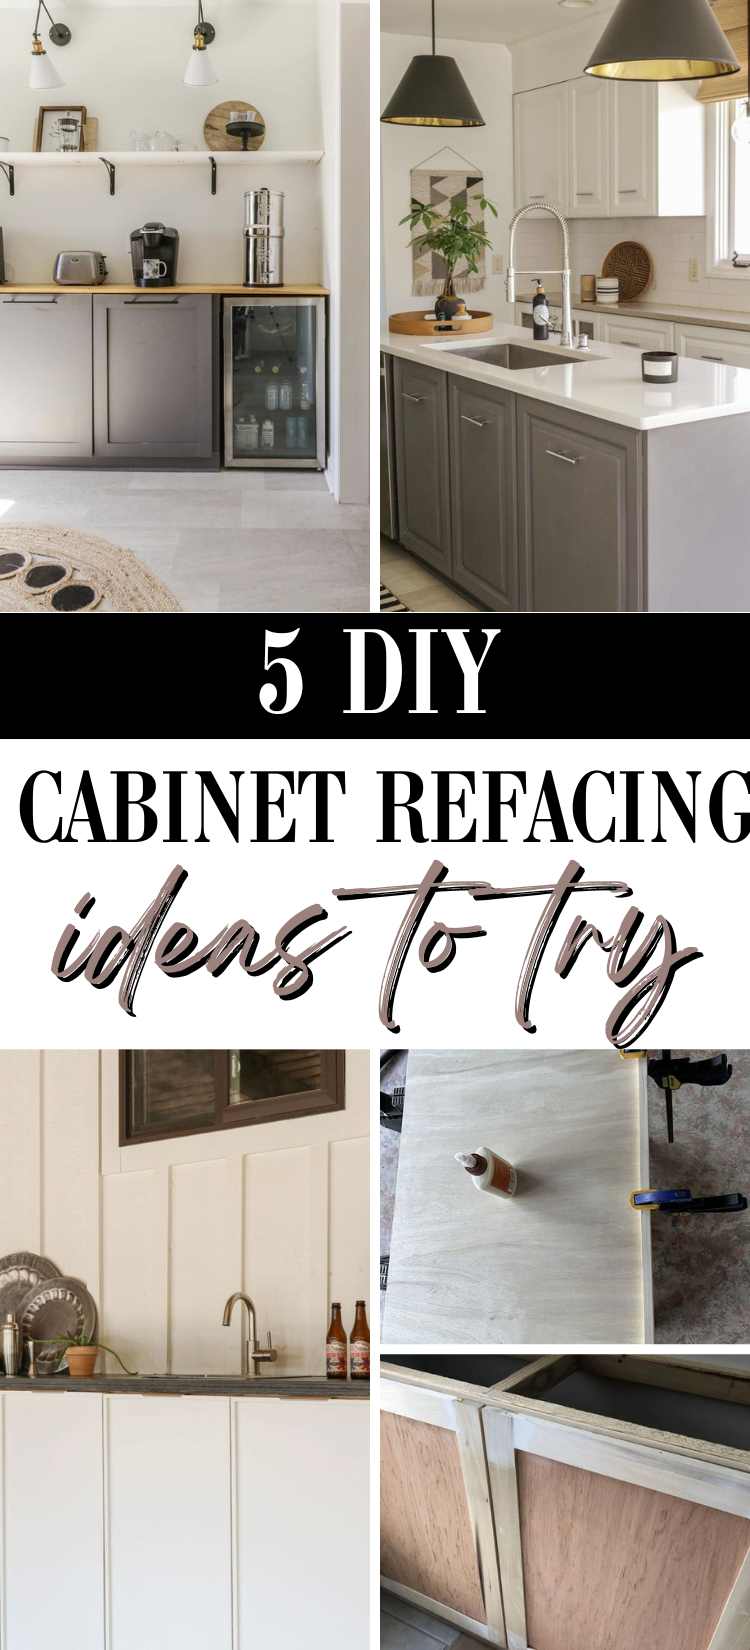 5 Best Diy Kitchen Cabinet Refacing Ideas To Try